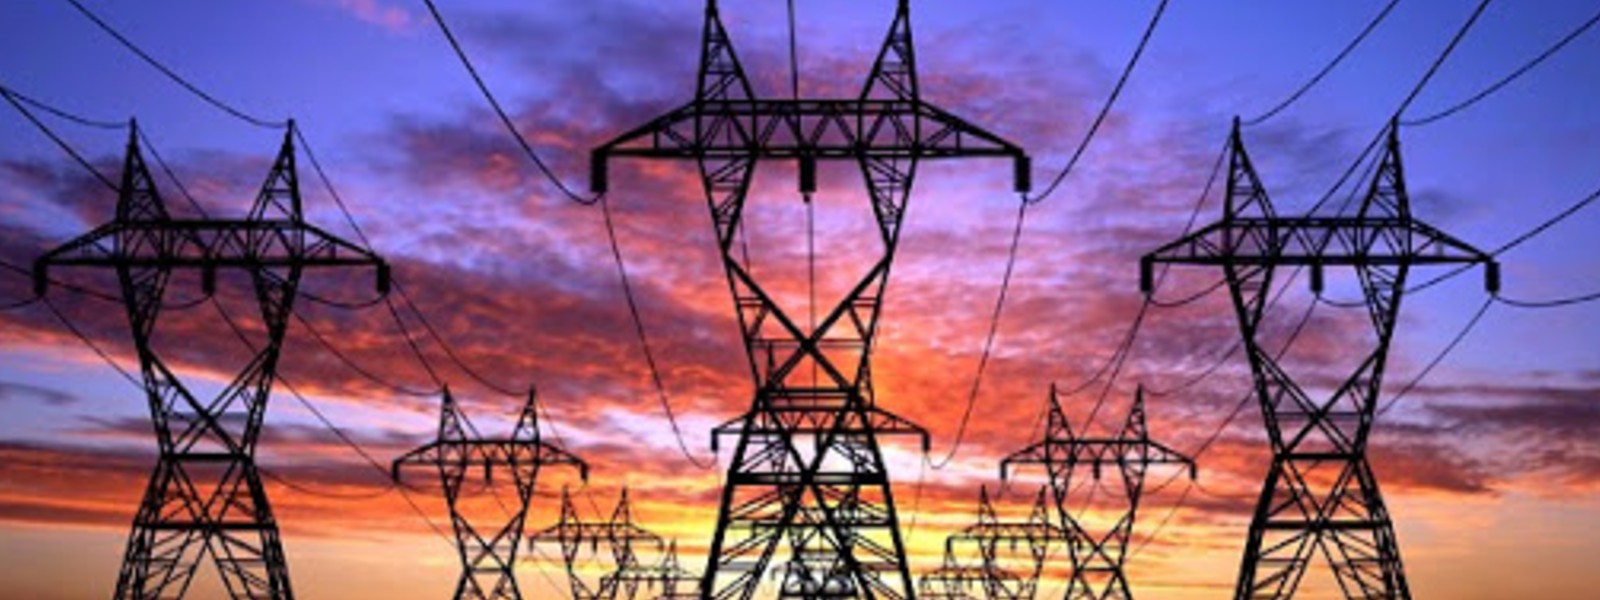 Island-wide electricity supply restored – Ministry of Power